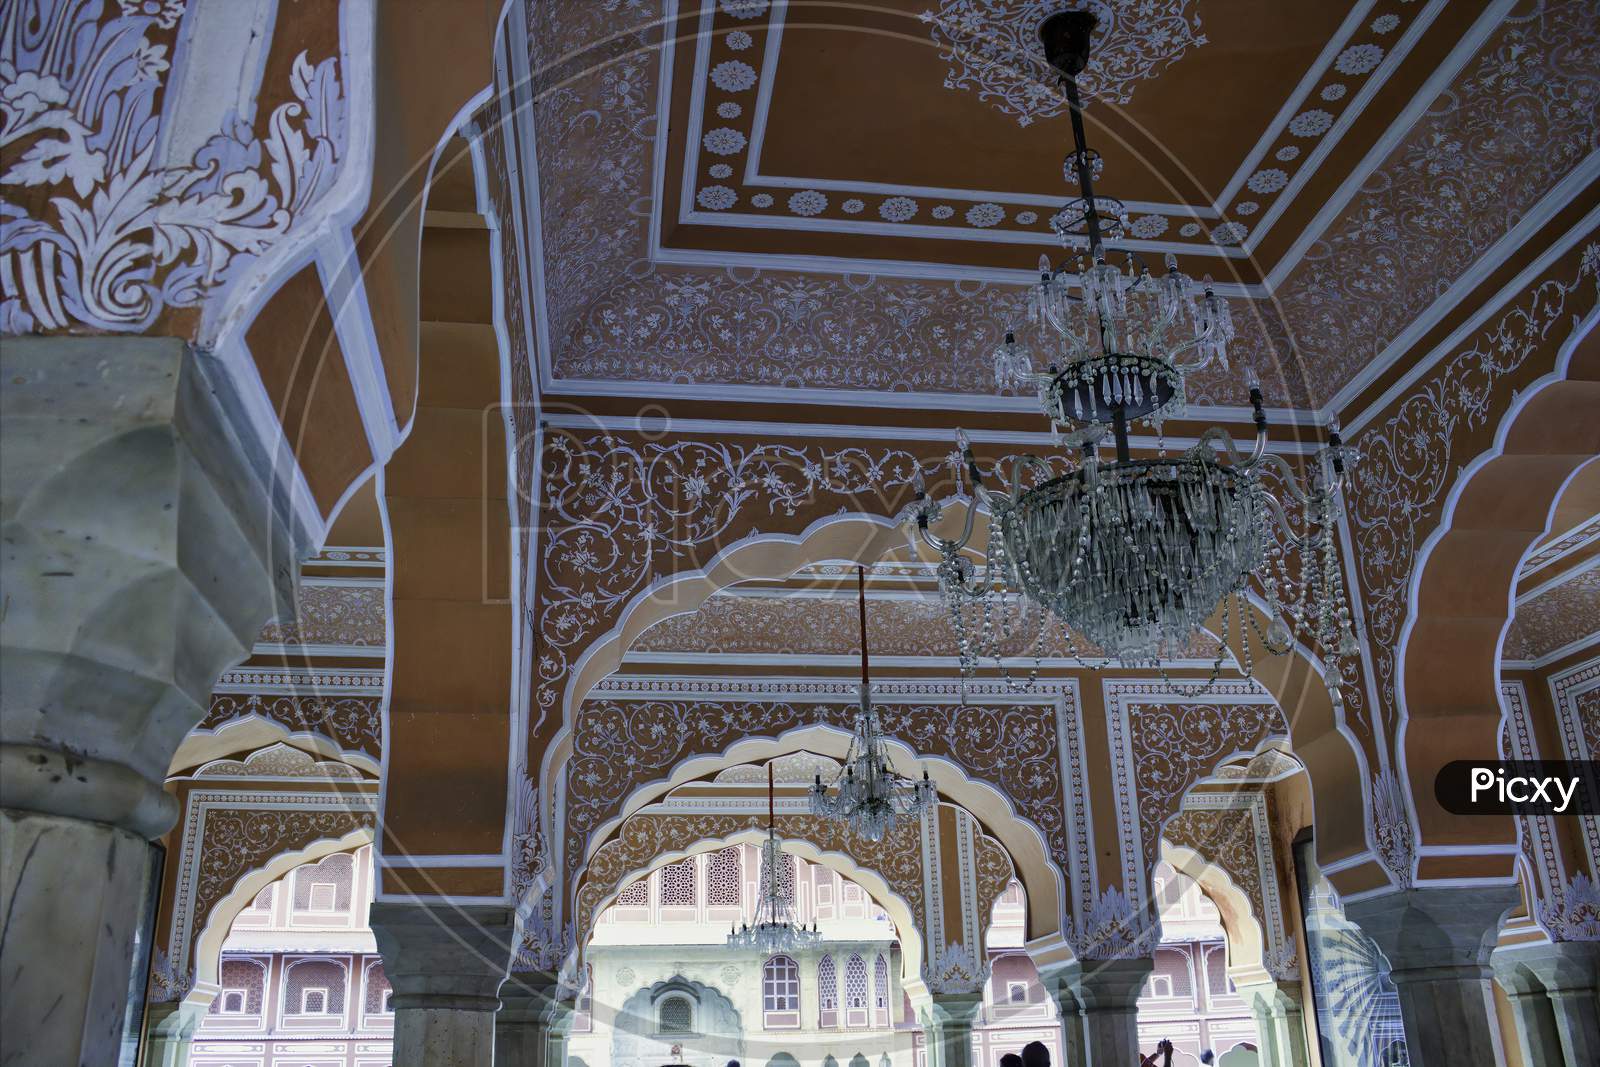 Jaipur, India - October 21, 2012: An Interior Of A Royal City Palace Opened As One Of The Tourist Attraction